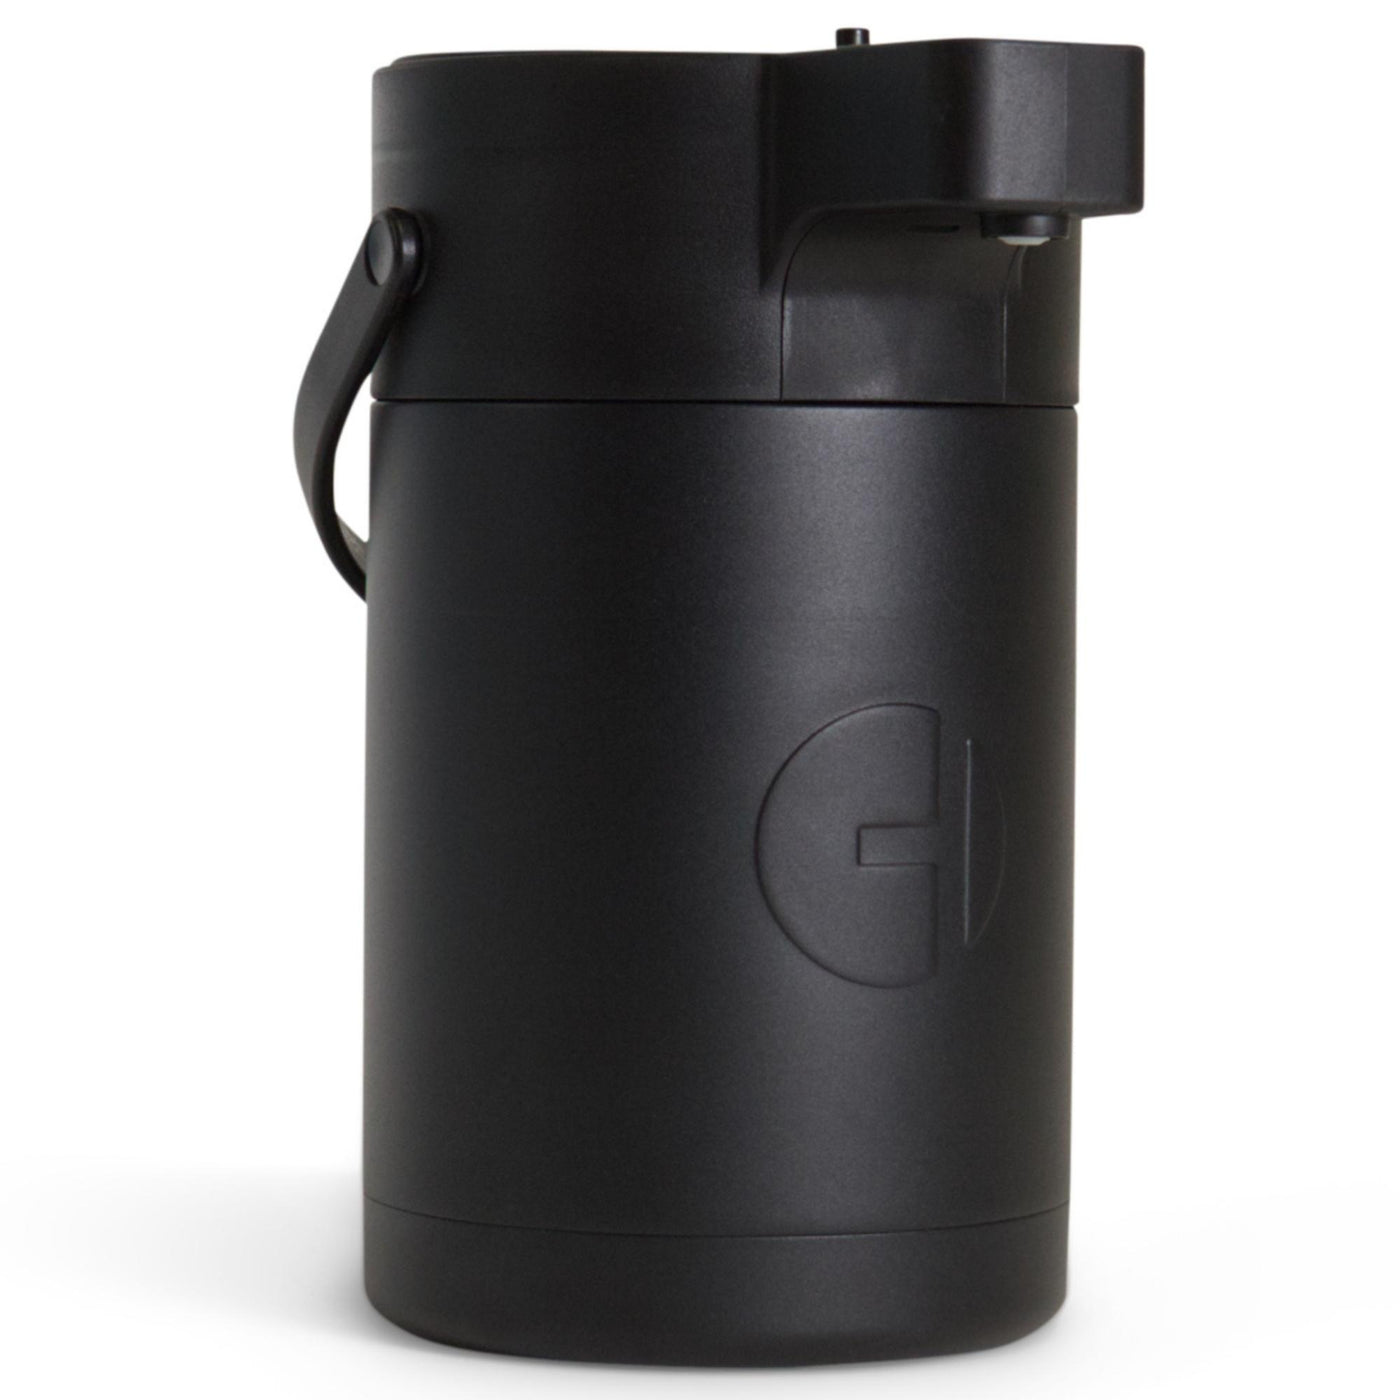 Hemma Black 85oz / 2.5L Thermal Airpot - Hastings Collective